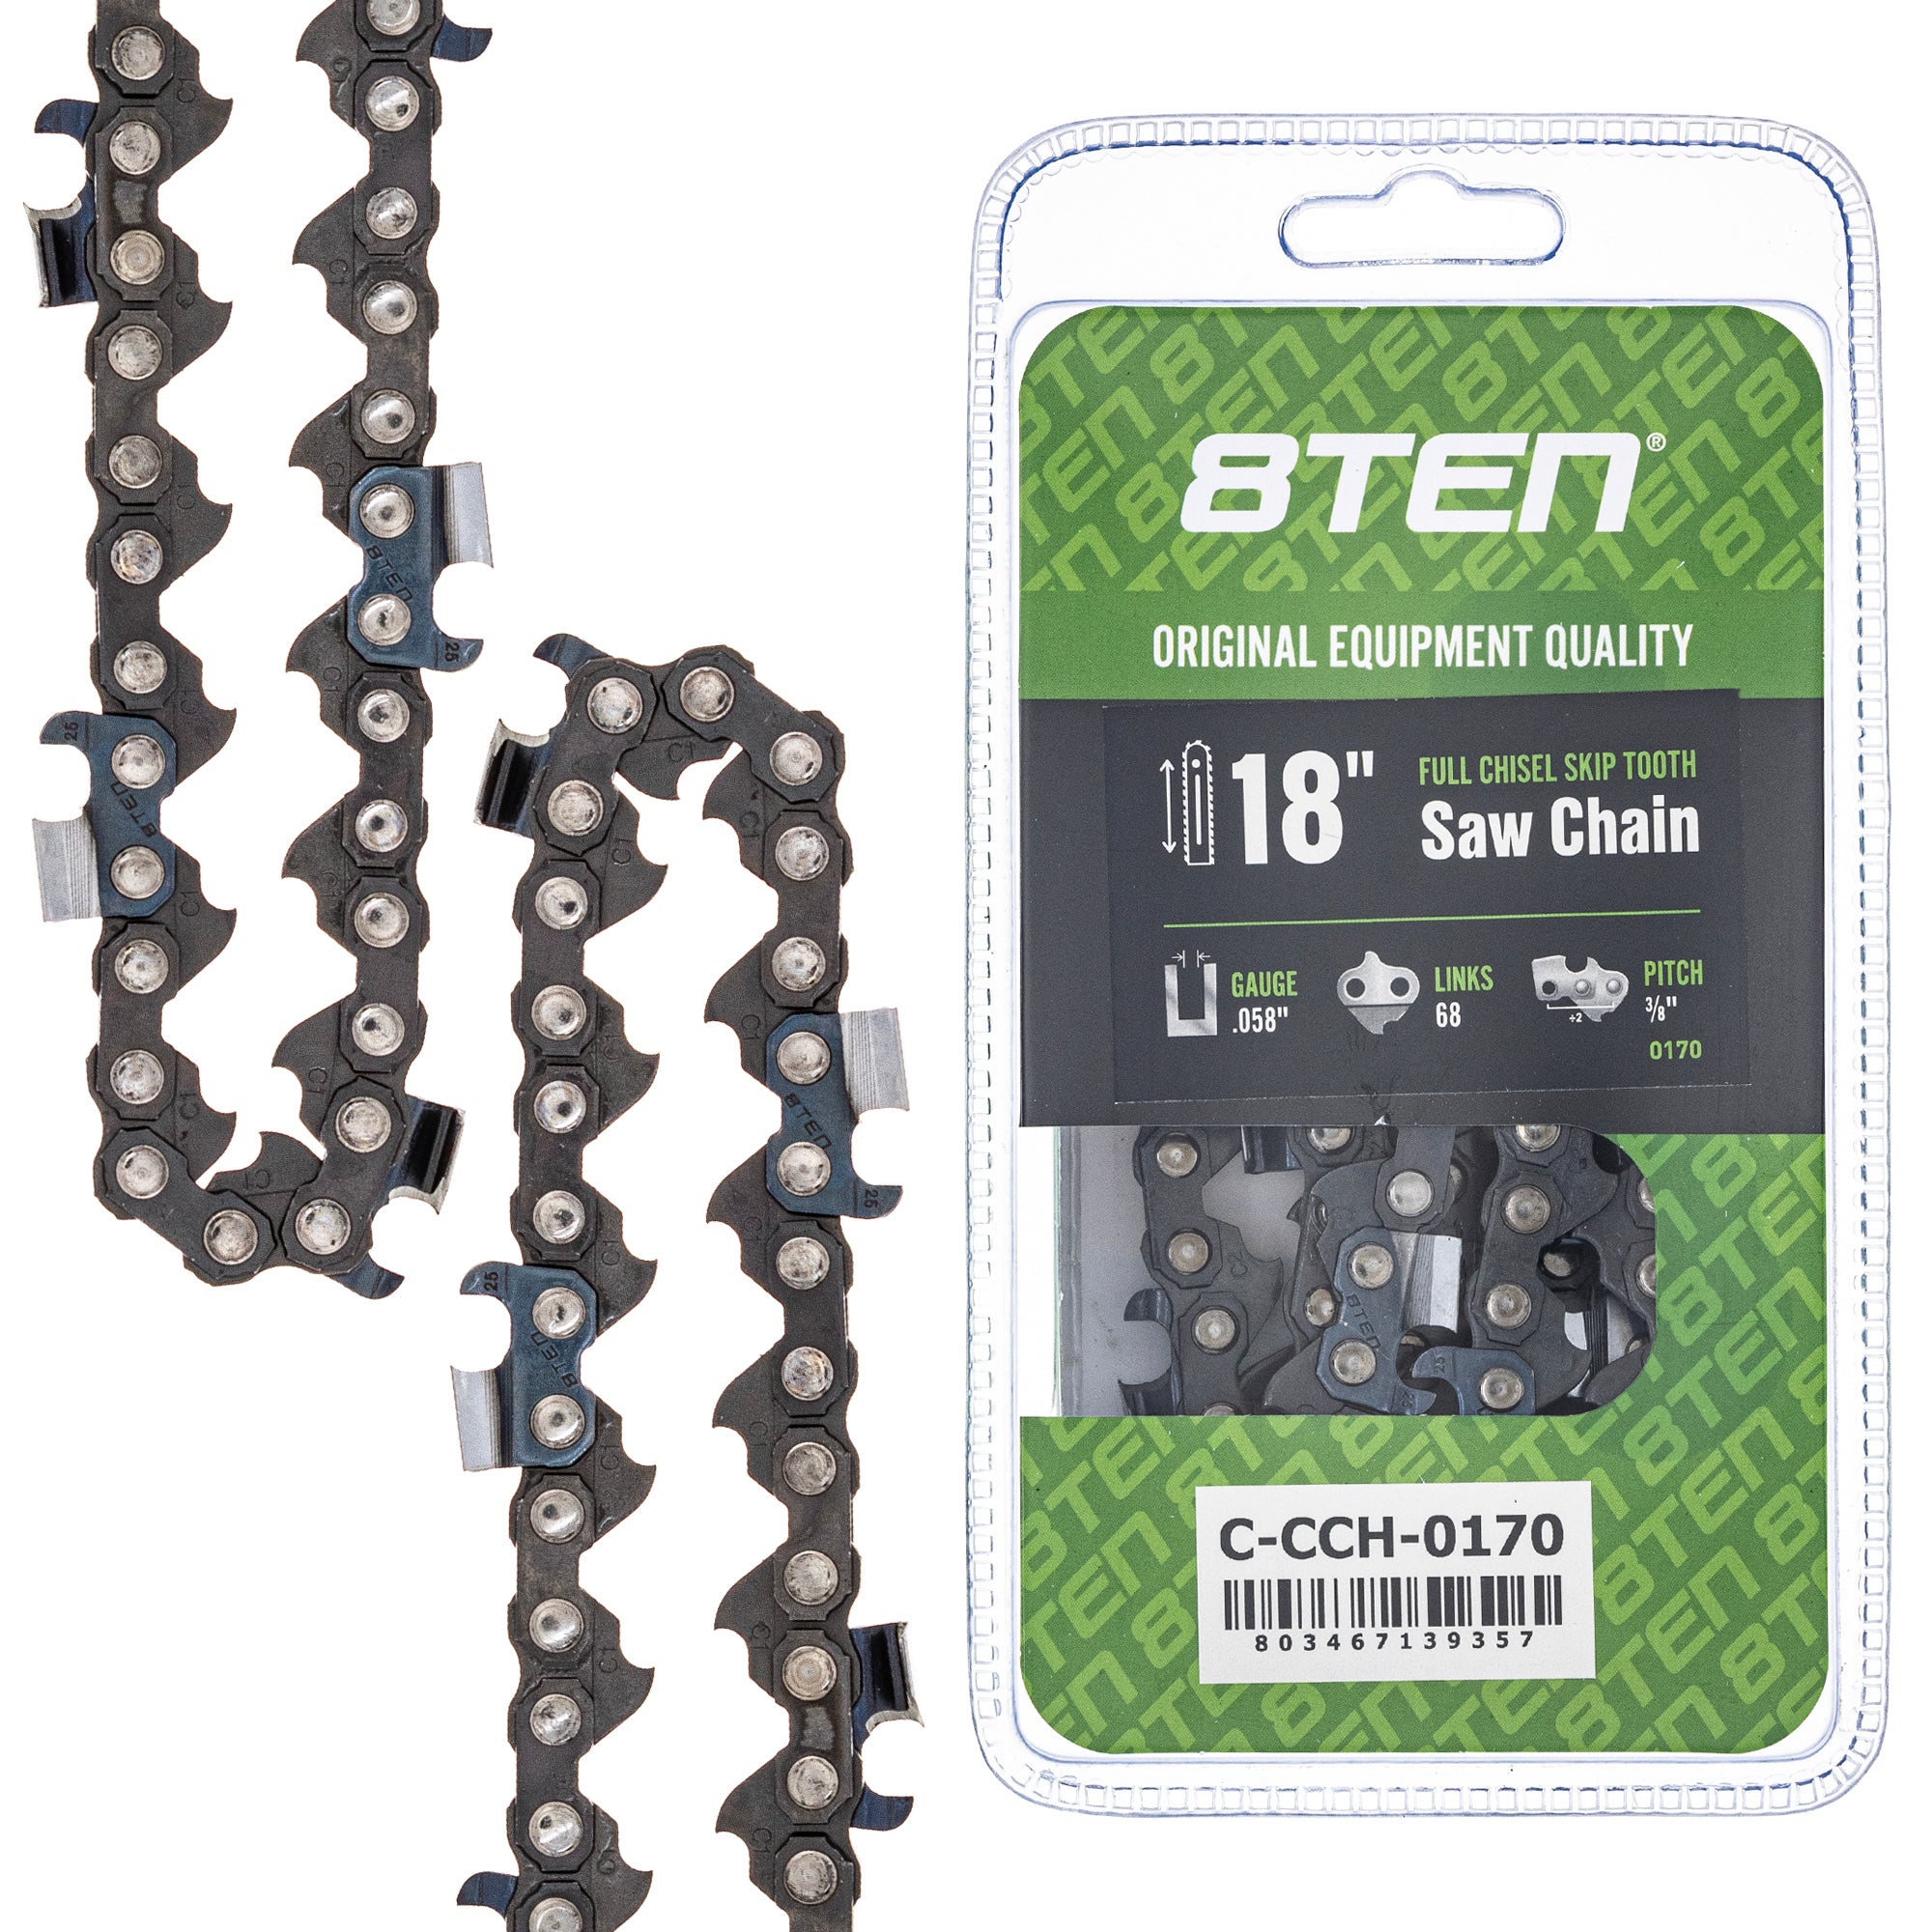 8TEN MK1010405 Guide Bar & Chain for S-65 S-55 S-50 R-440